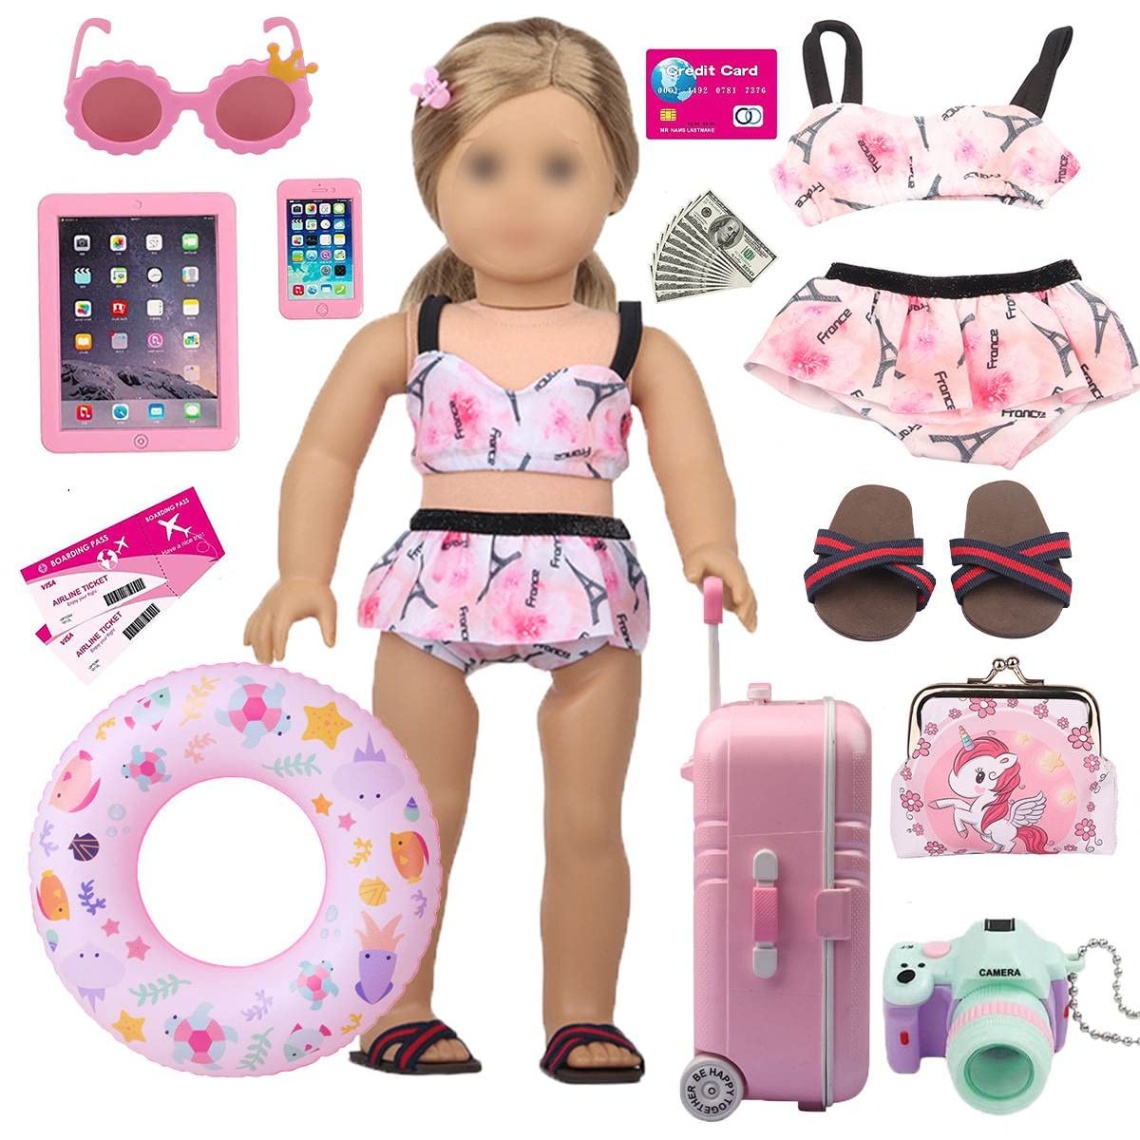 dolls and accessories Niche Utama Home American  inch Doll Accessories-Include Suitcase,Doll Swimming  Suit,Swimming Ring,Sunglasses,Camera,etc